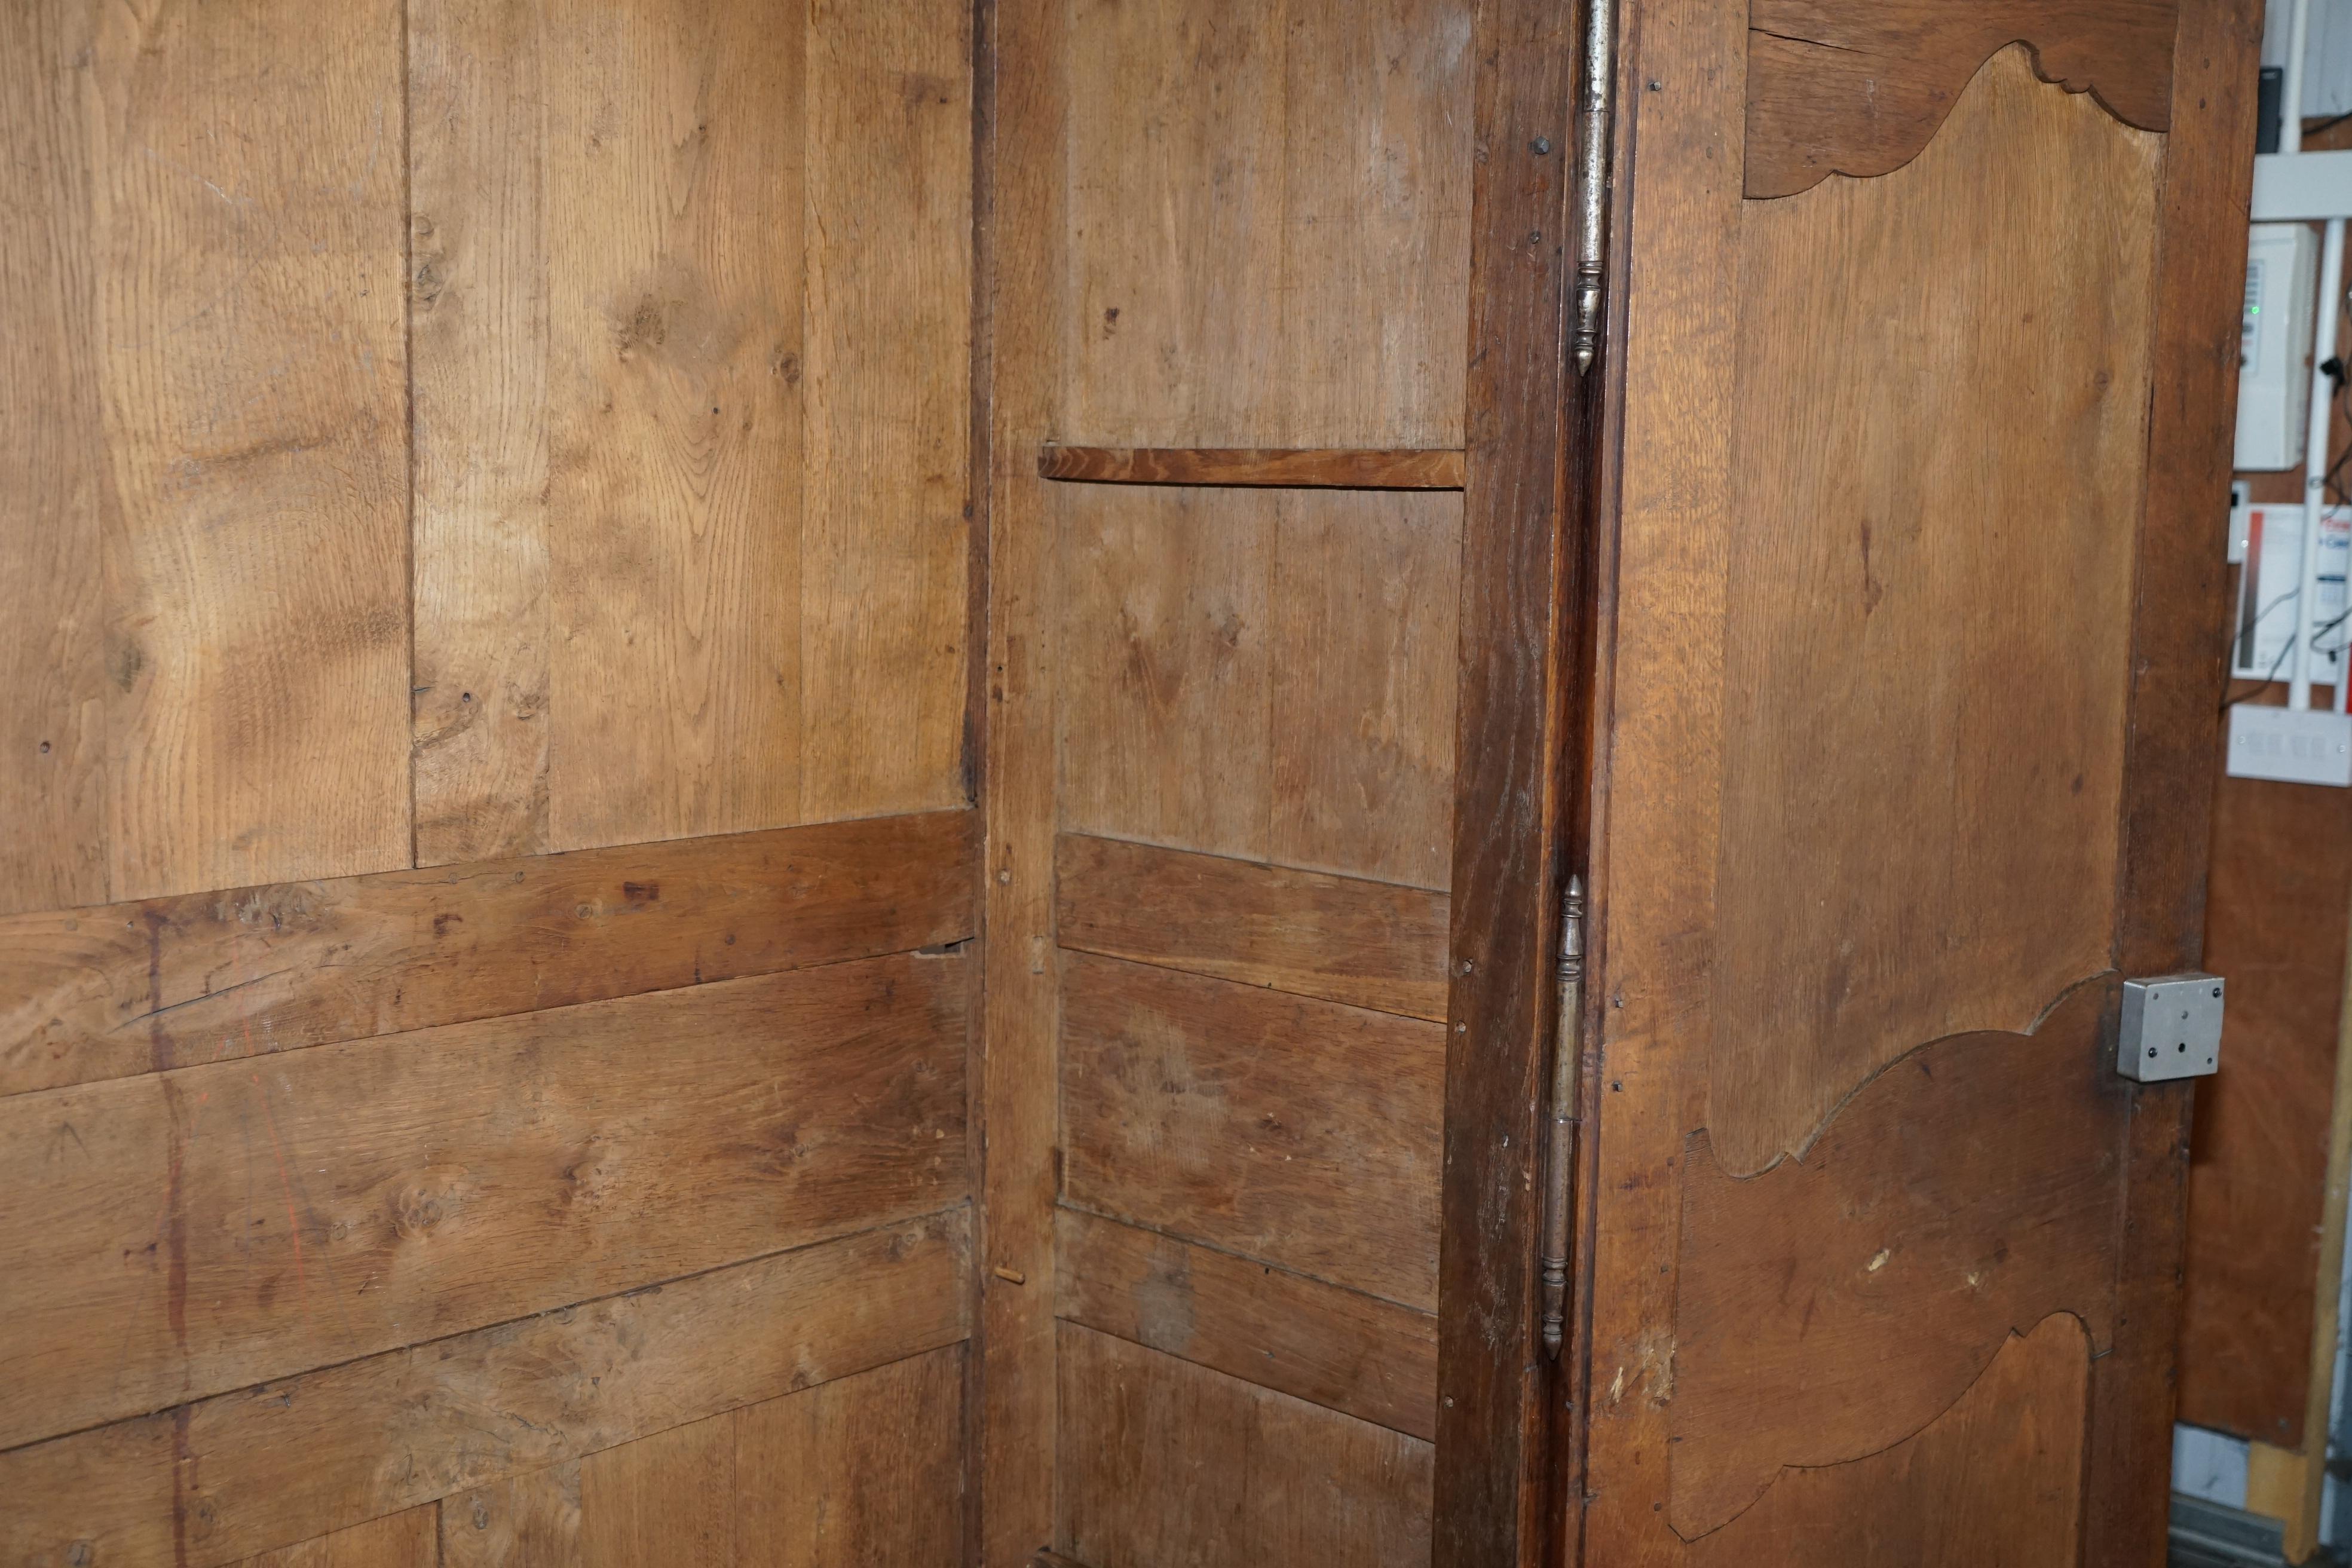 Antique 1844 Carved & Dated Large Wardrobe Armoire with Expertly Crafted Panels For Sale 9